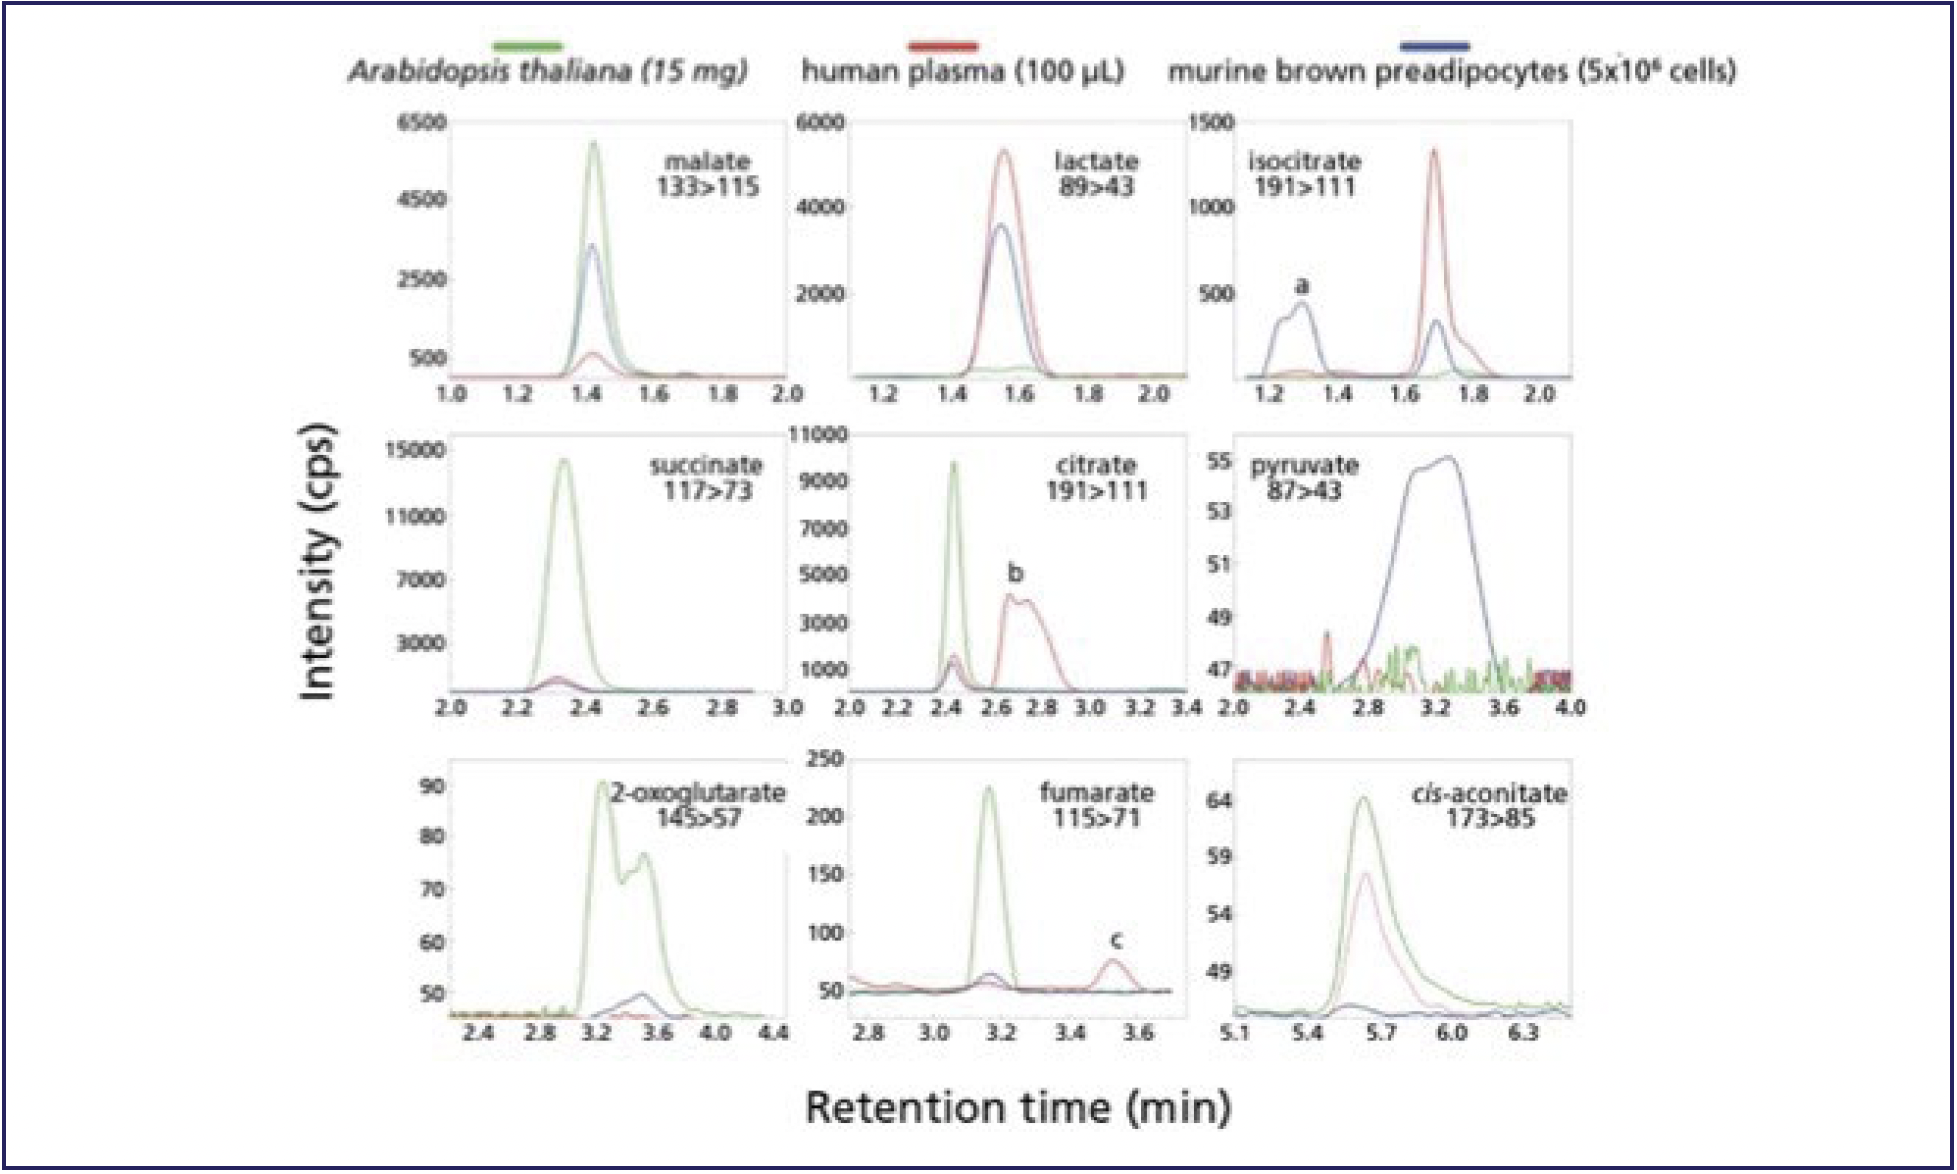 FIGURE 2: Ion chromatograms of TCA carboxylates (malate, lactate, isocitrate, succinate, citrate, pyruvate, 2-oxoglutarate, fumarate, and cis-aconitate) identified in A. thaliana, human plasma, and murine brown preadipocytes (7).